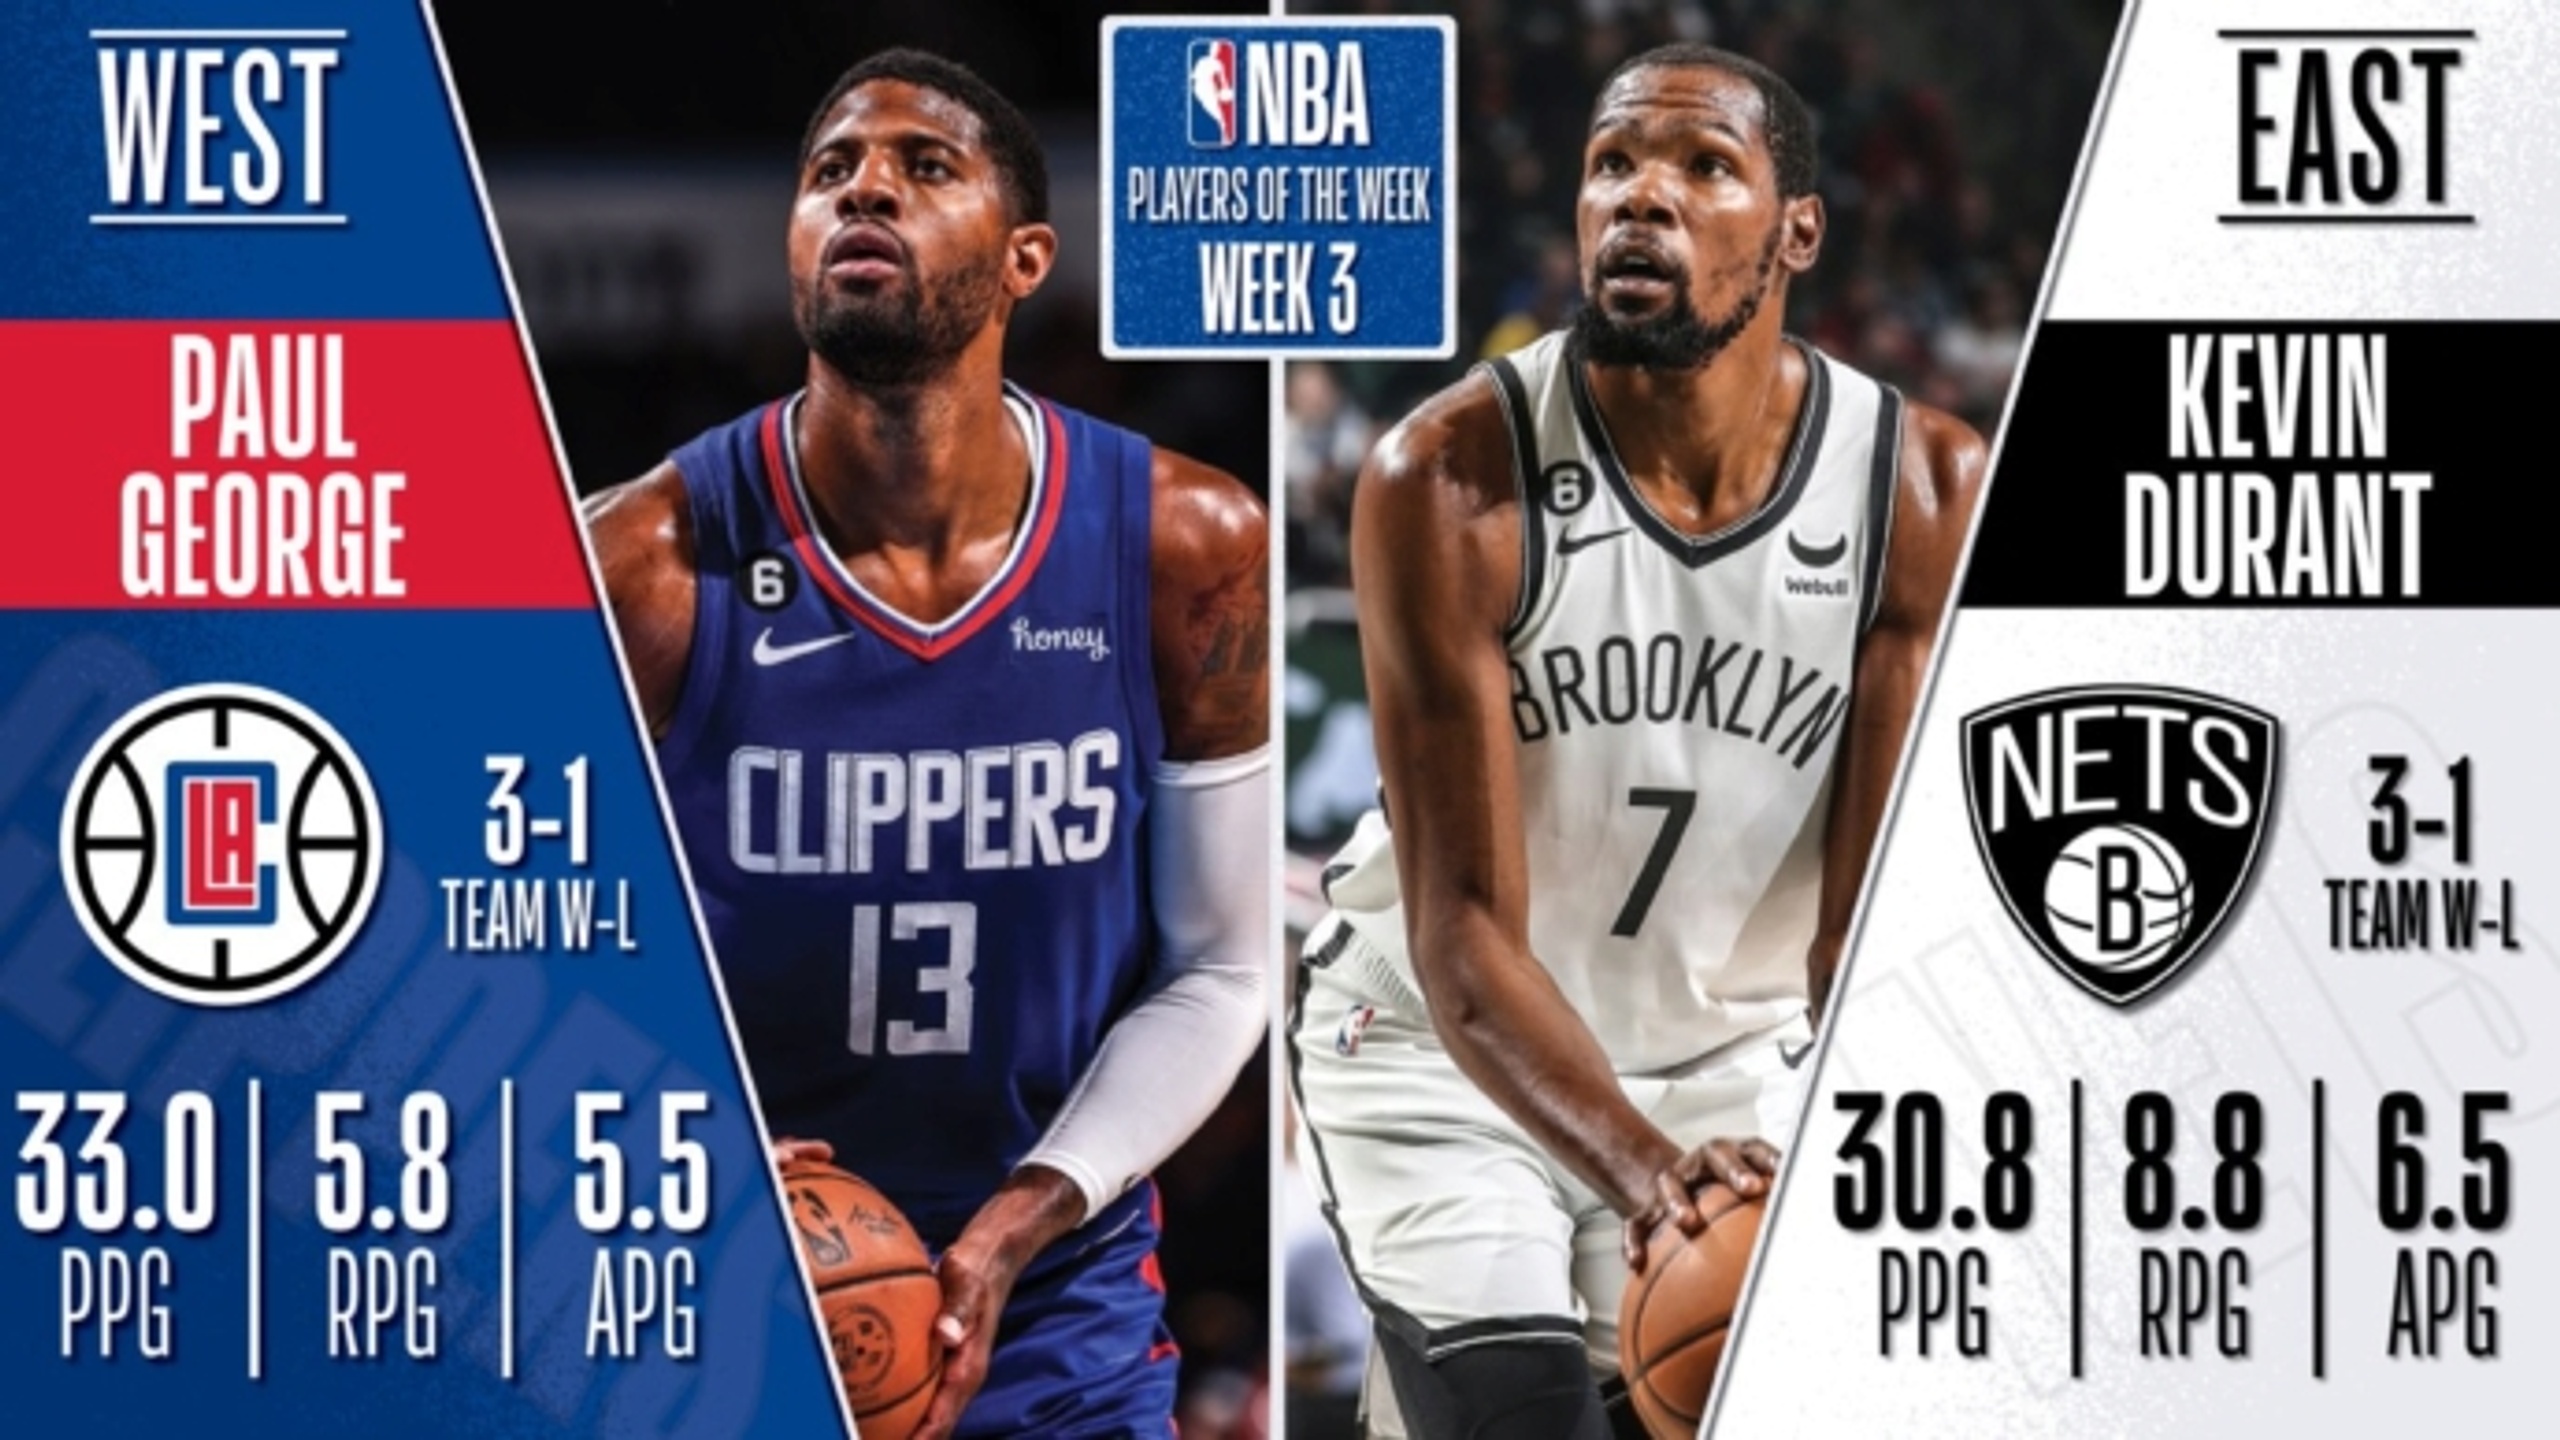 Paul George, Kevin Durant named players of the week